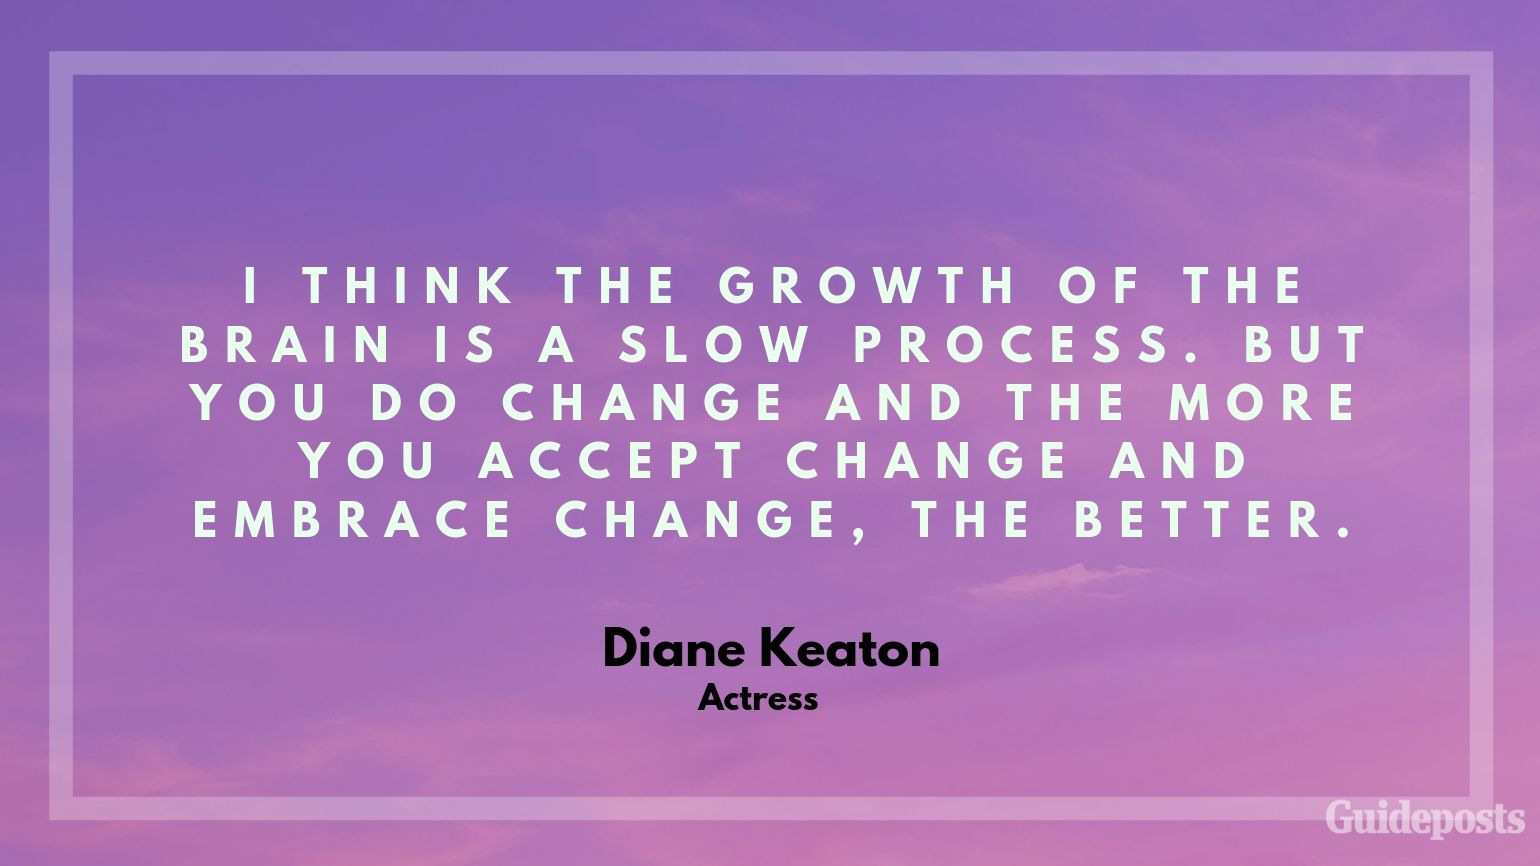 Diane Keaton Actress Inspirational Quote Embracing Change Better Living Life Advice Managing Life Changes